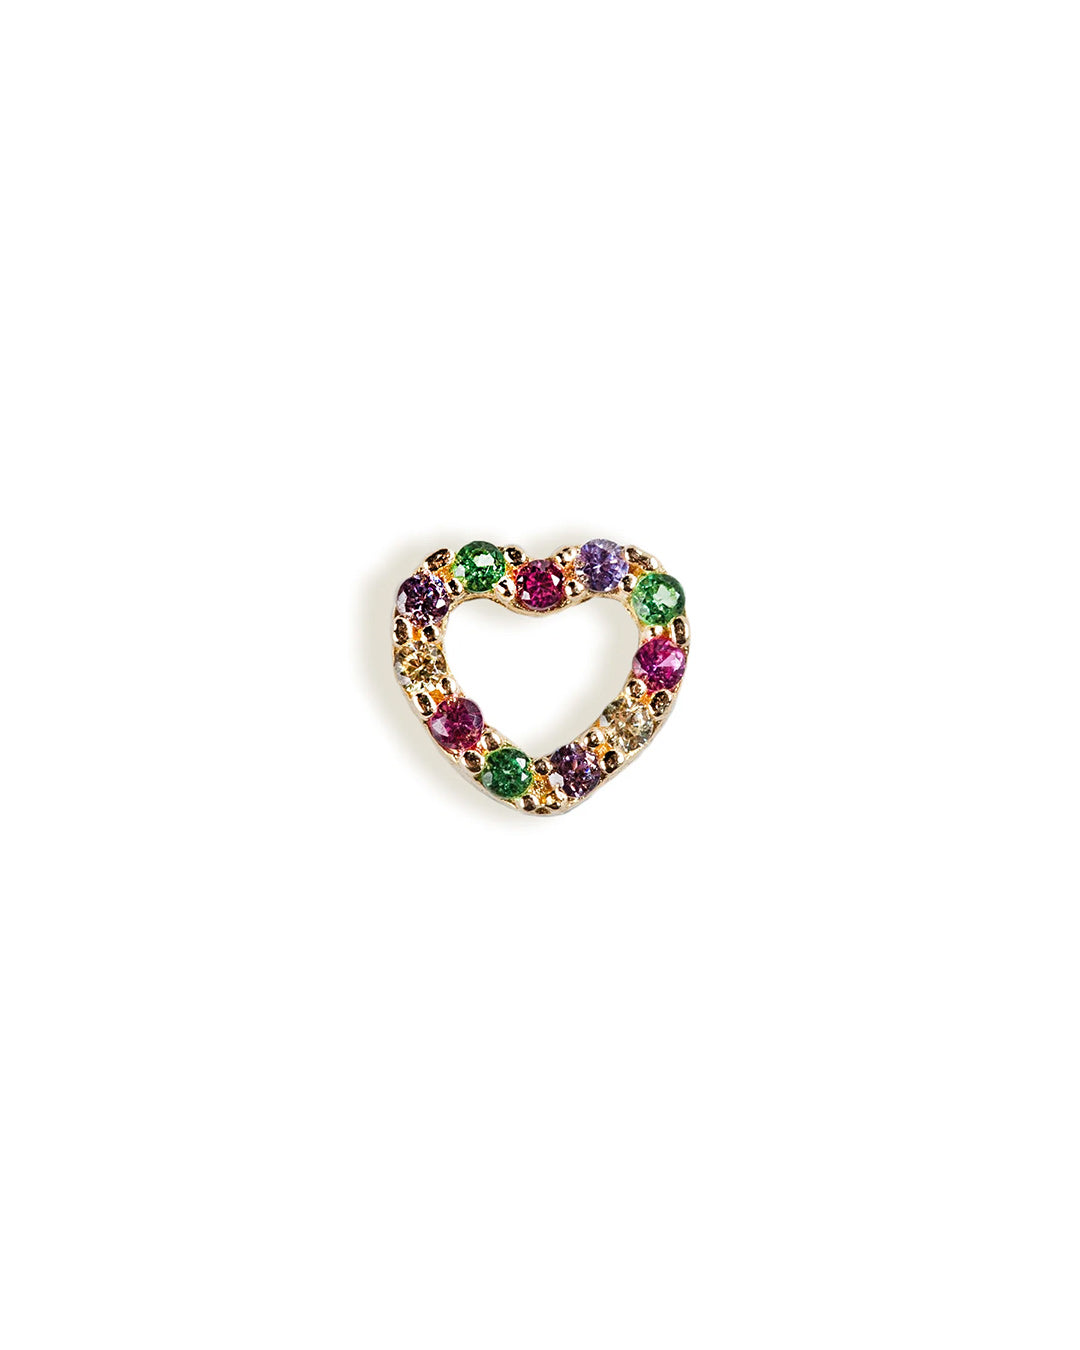 14K GOLD HEART PIERCING WITH MULTICOLOR CRYSTALS